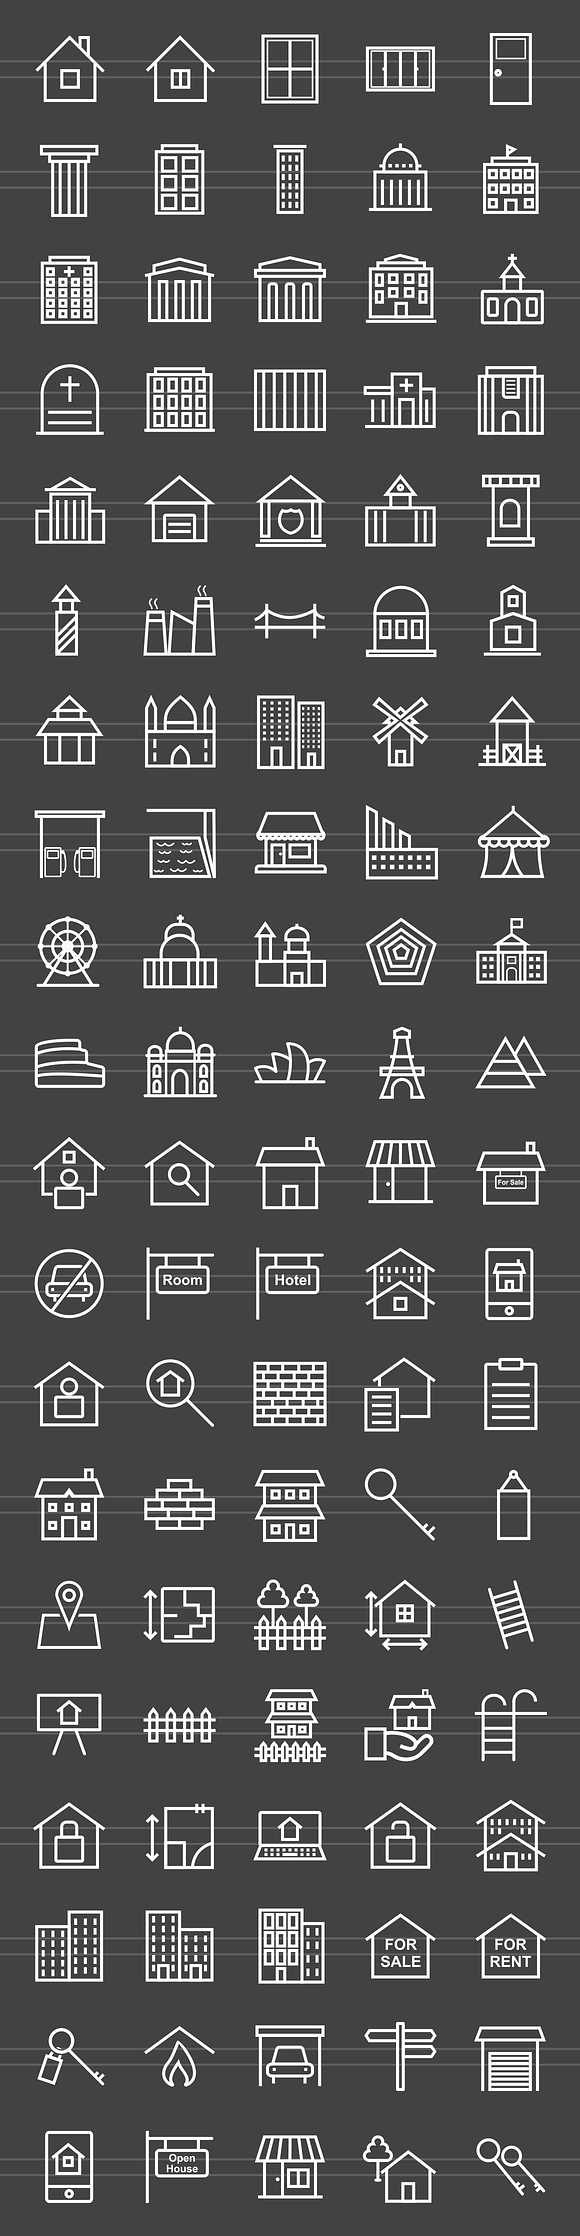 100 Building & Landmarks Line Icons in Graphics - product preview 1